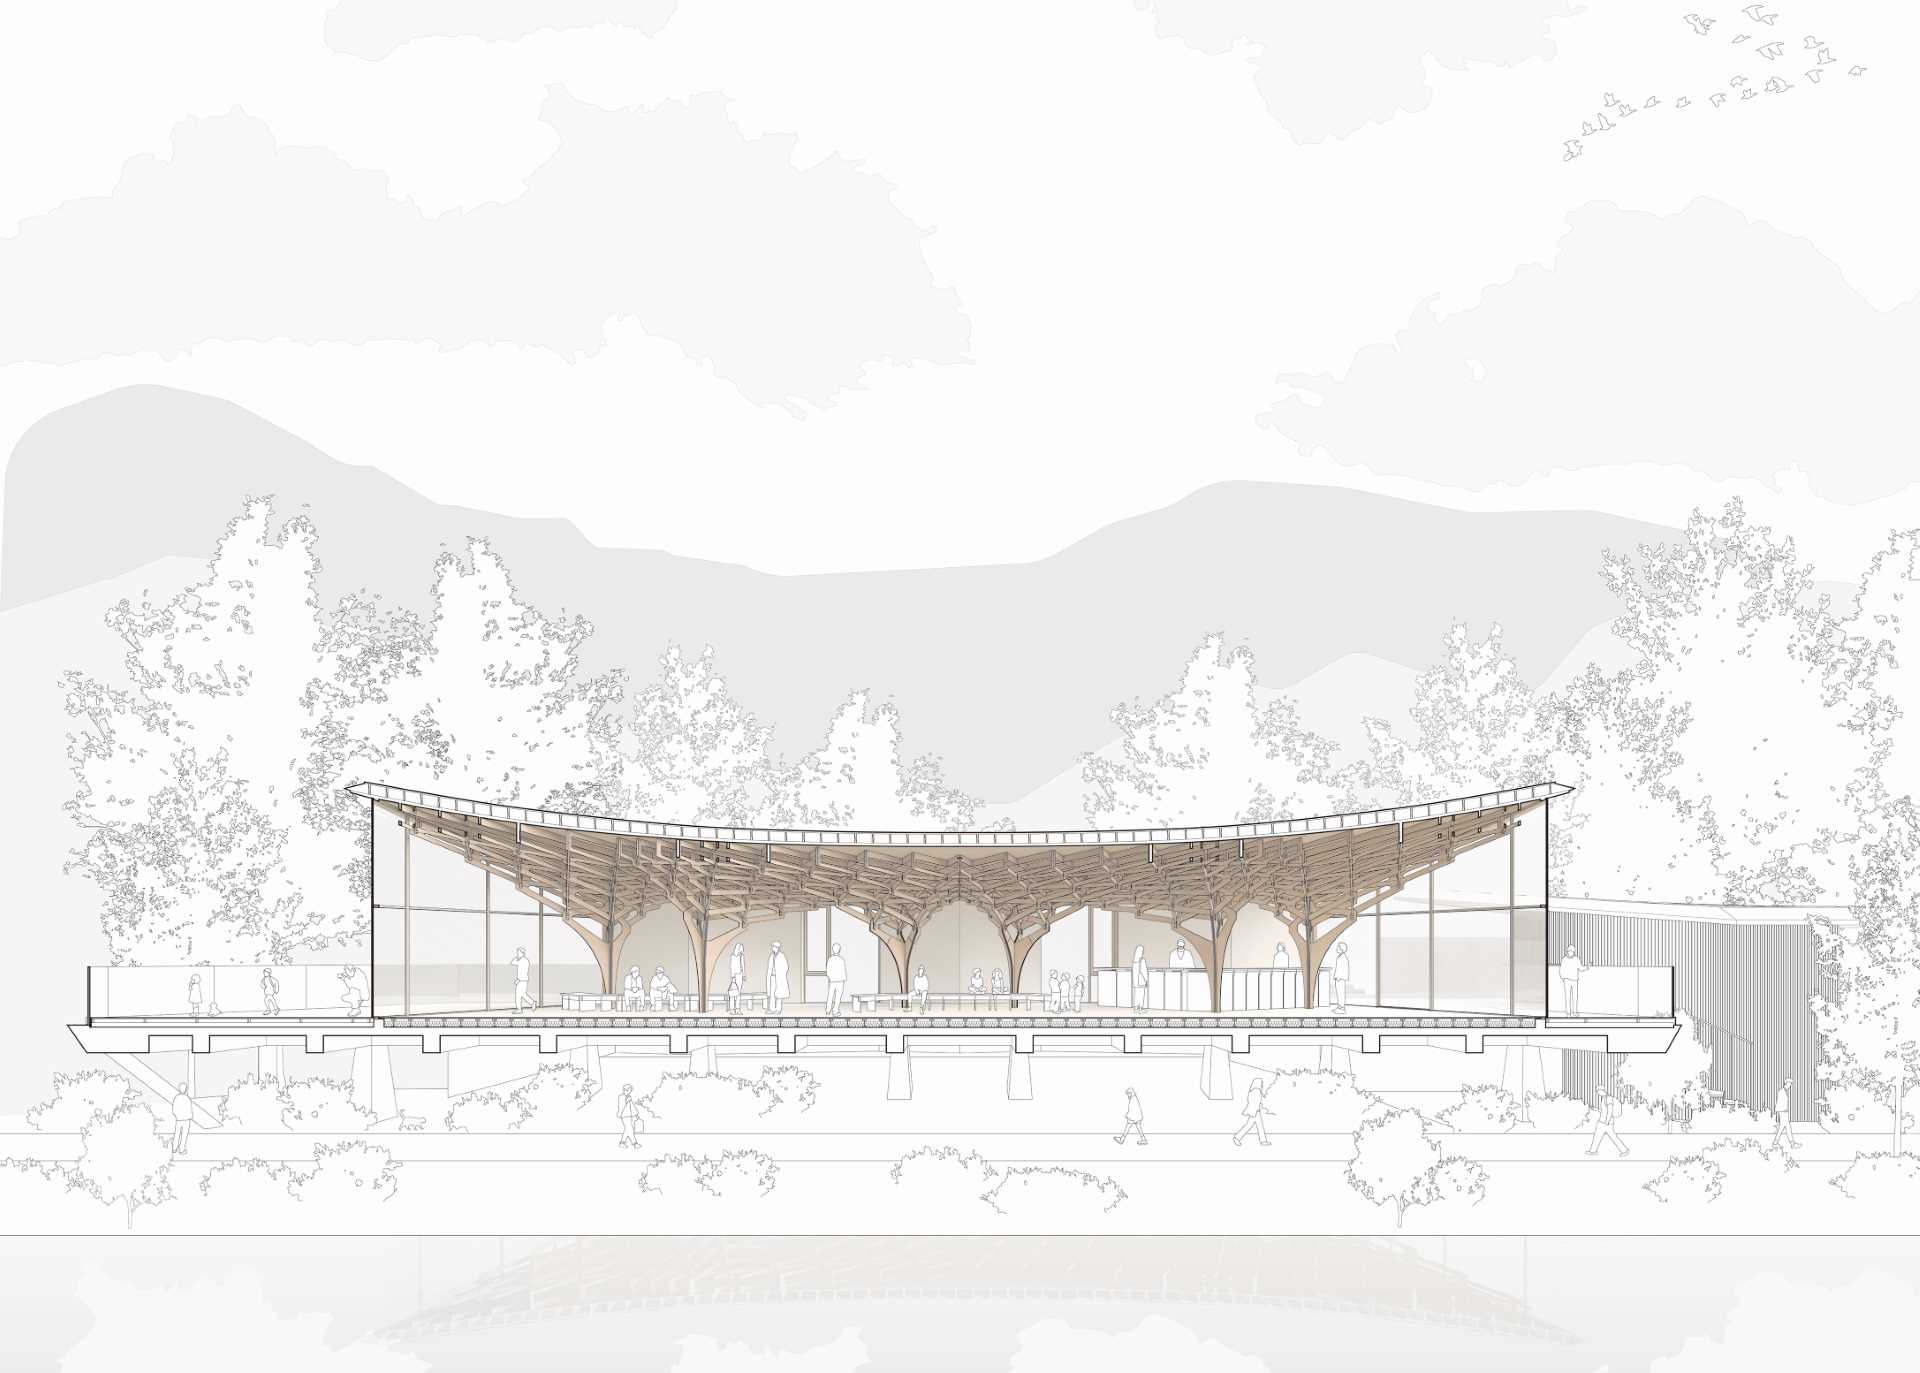 Six tree-like columns showcase wood craftsmanship inside a riverside pavilion with a glass front and curved roof.